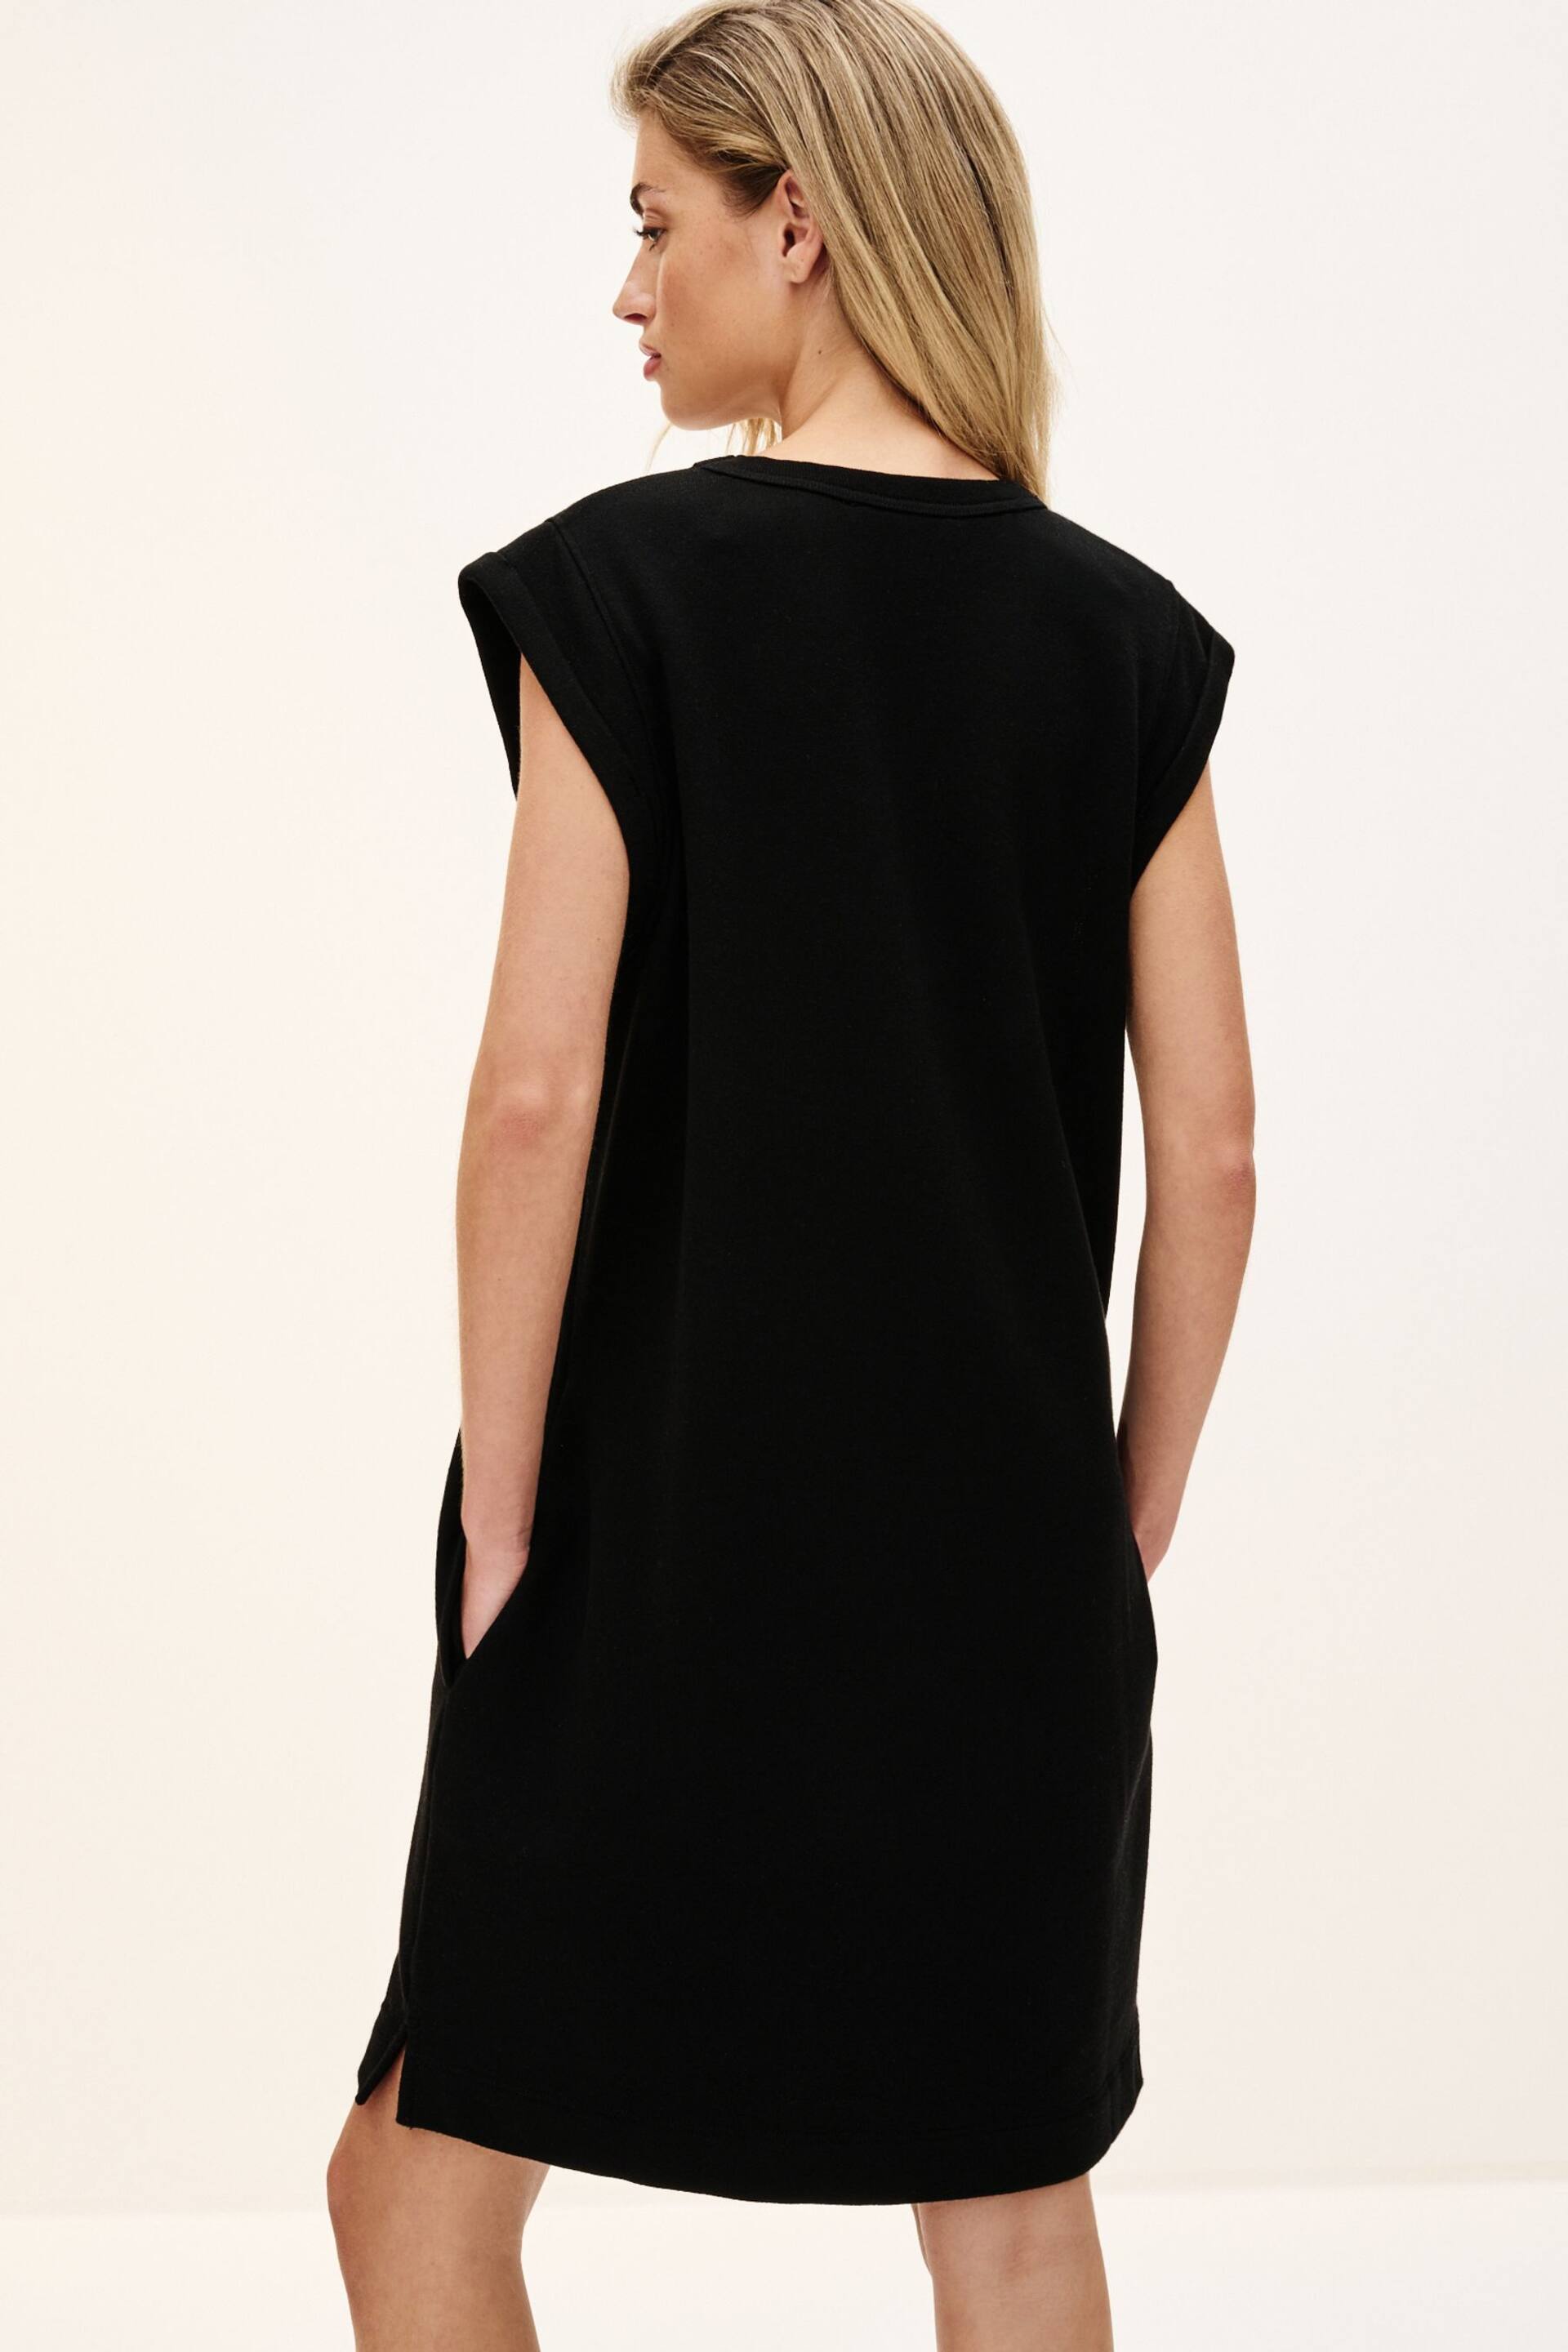 Black Relaxed Fit Jersey Short Sleeve Dress - Image 3 of 6